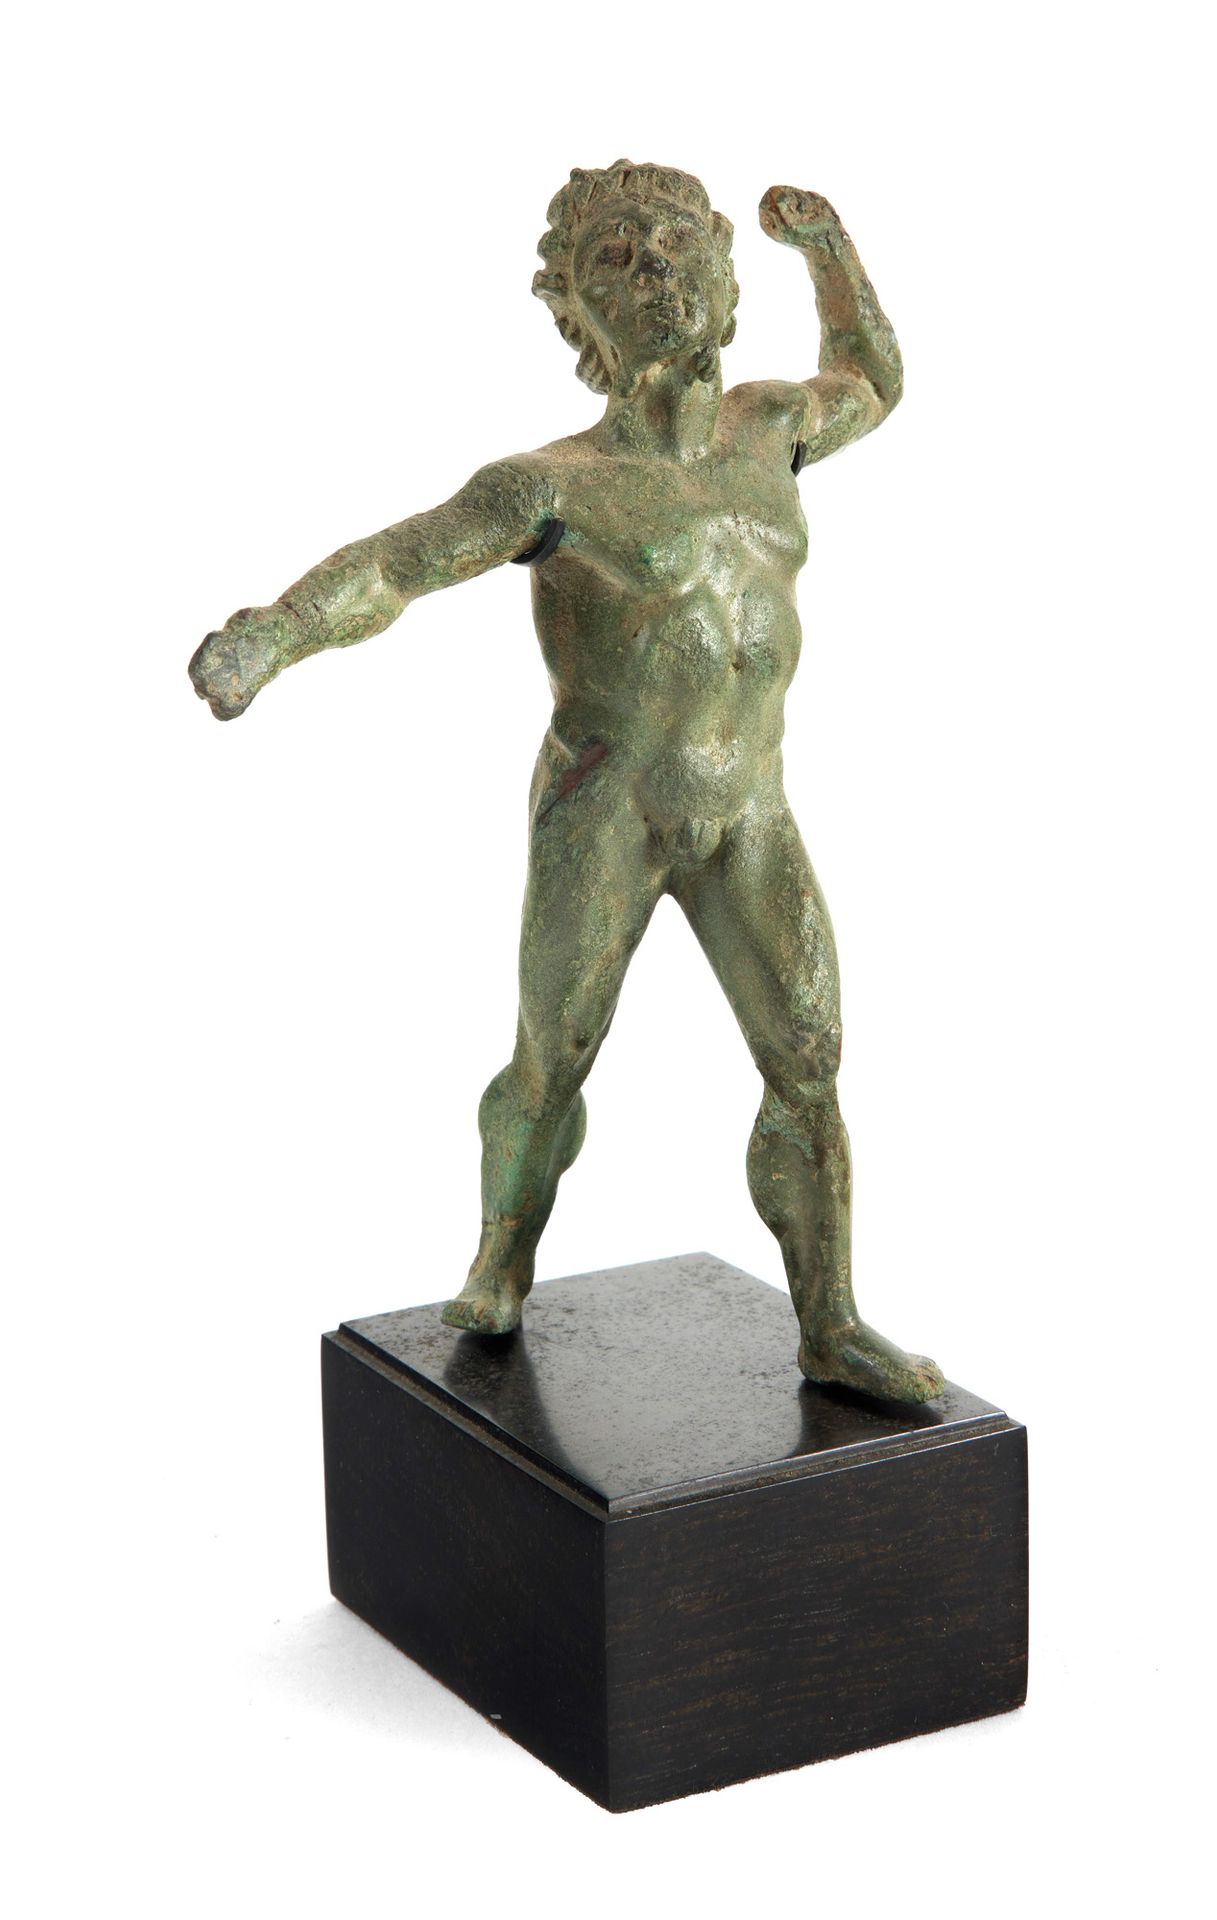 Statuette de faune Statuette of a dancing

dancing. He is naked, with a realisti&hellip;